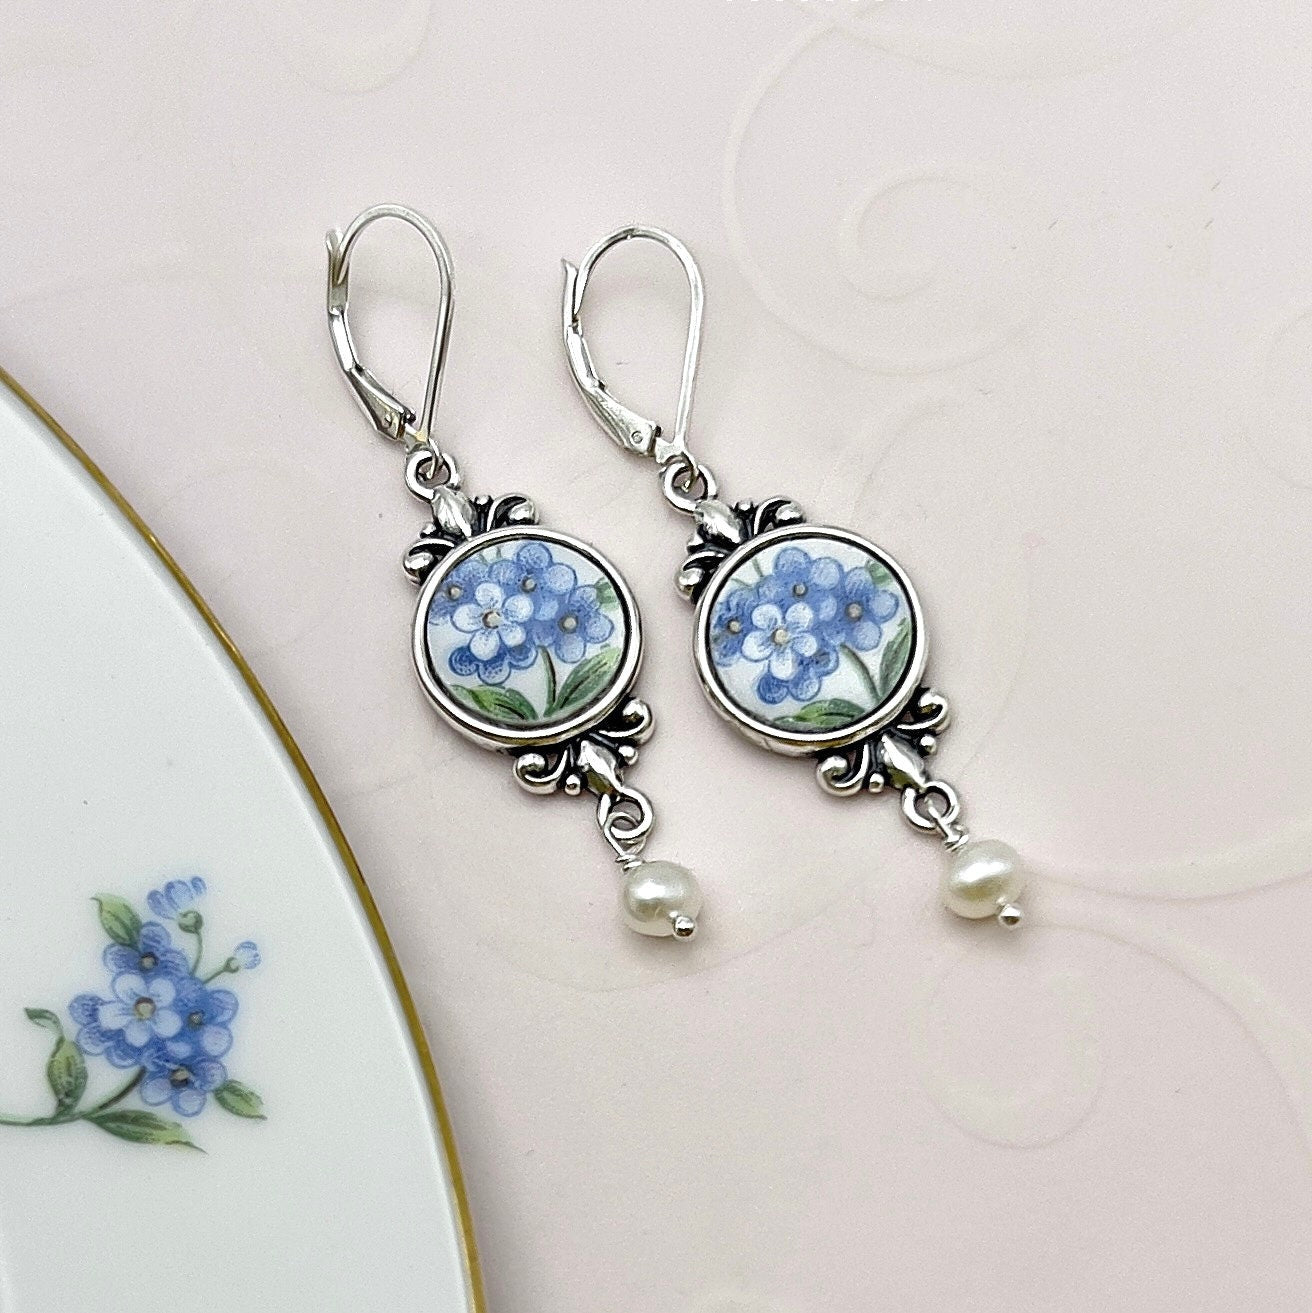 Forget Me Not Flower Locket Necklace Set, Broken China Jewelry, Unique Anniversary Gifts for Her